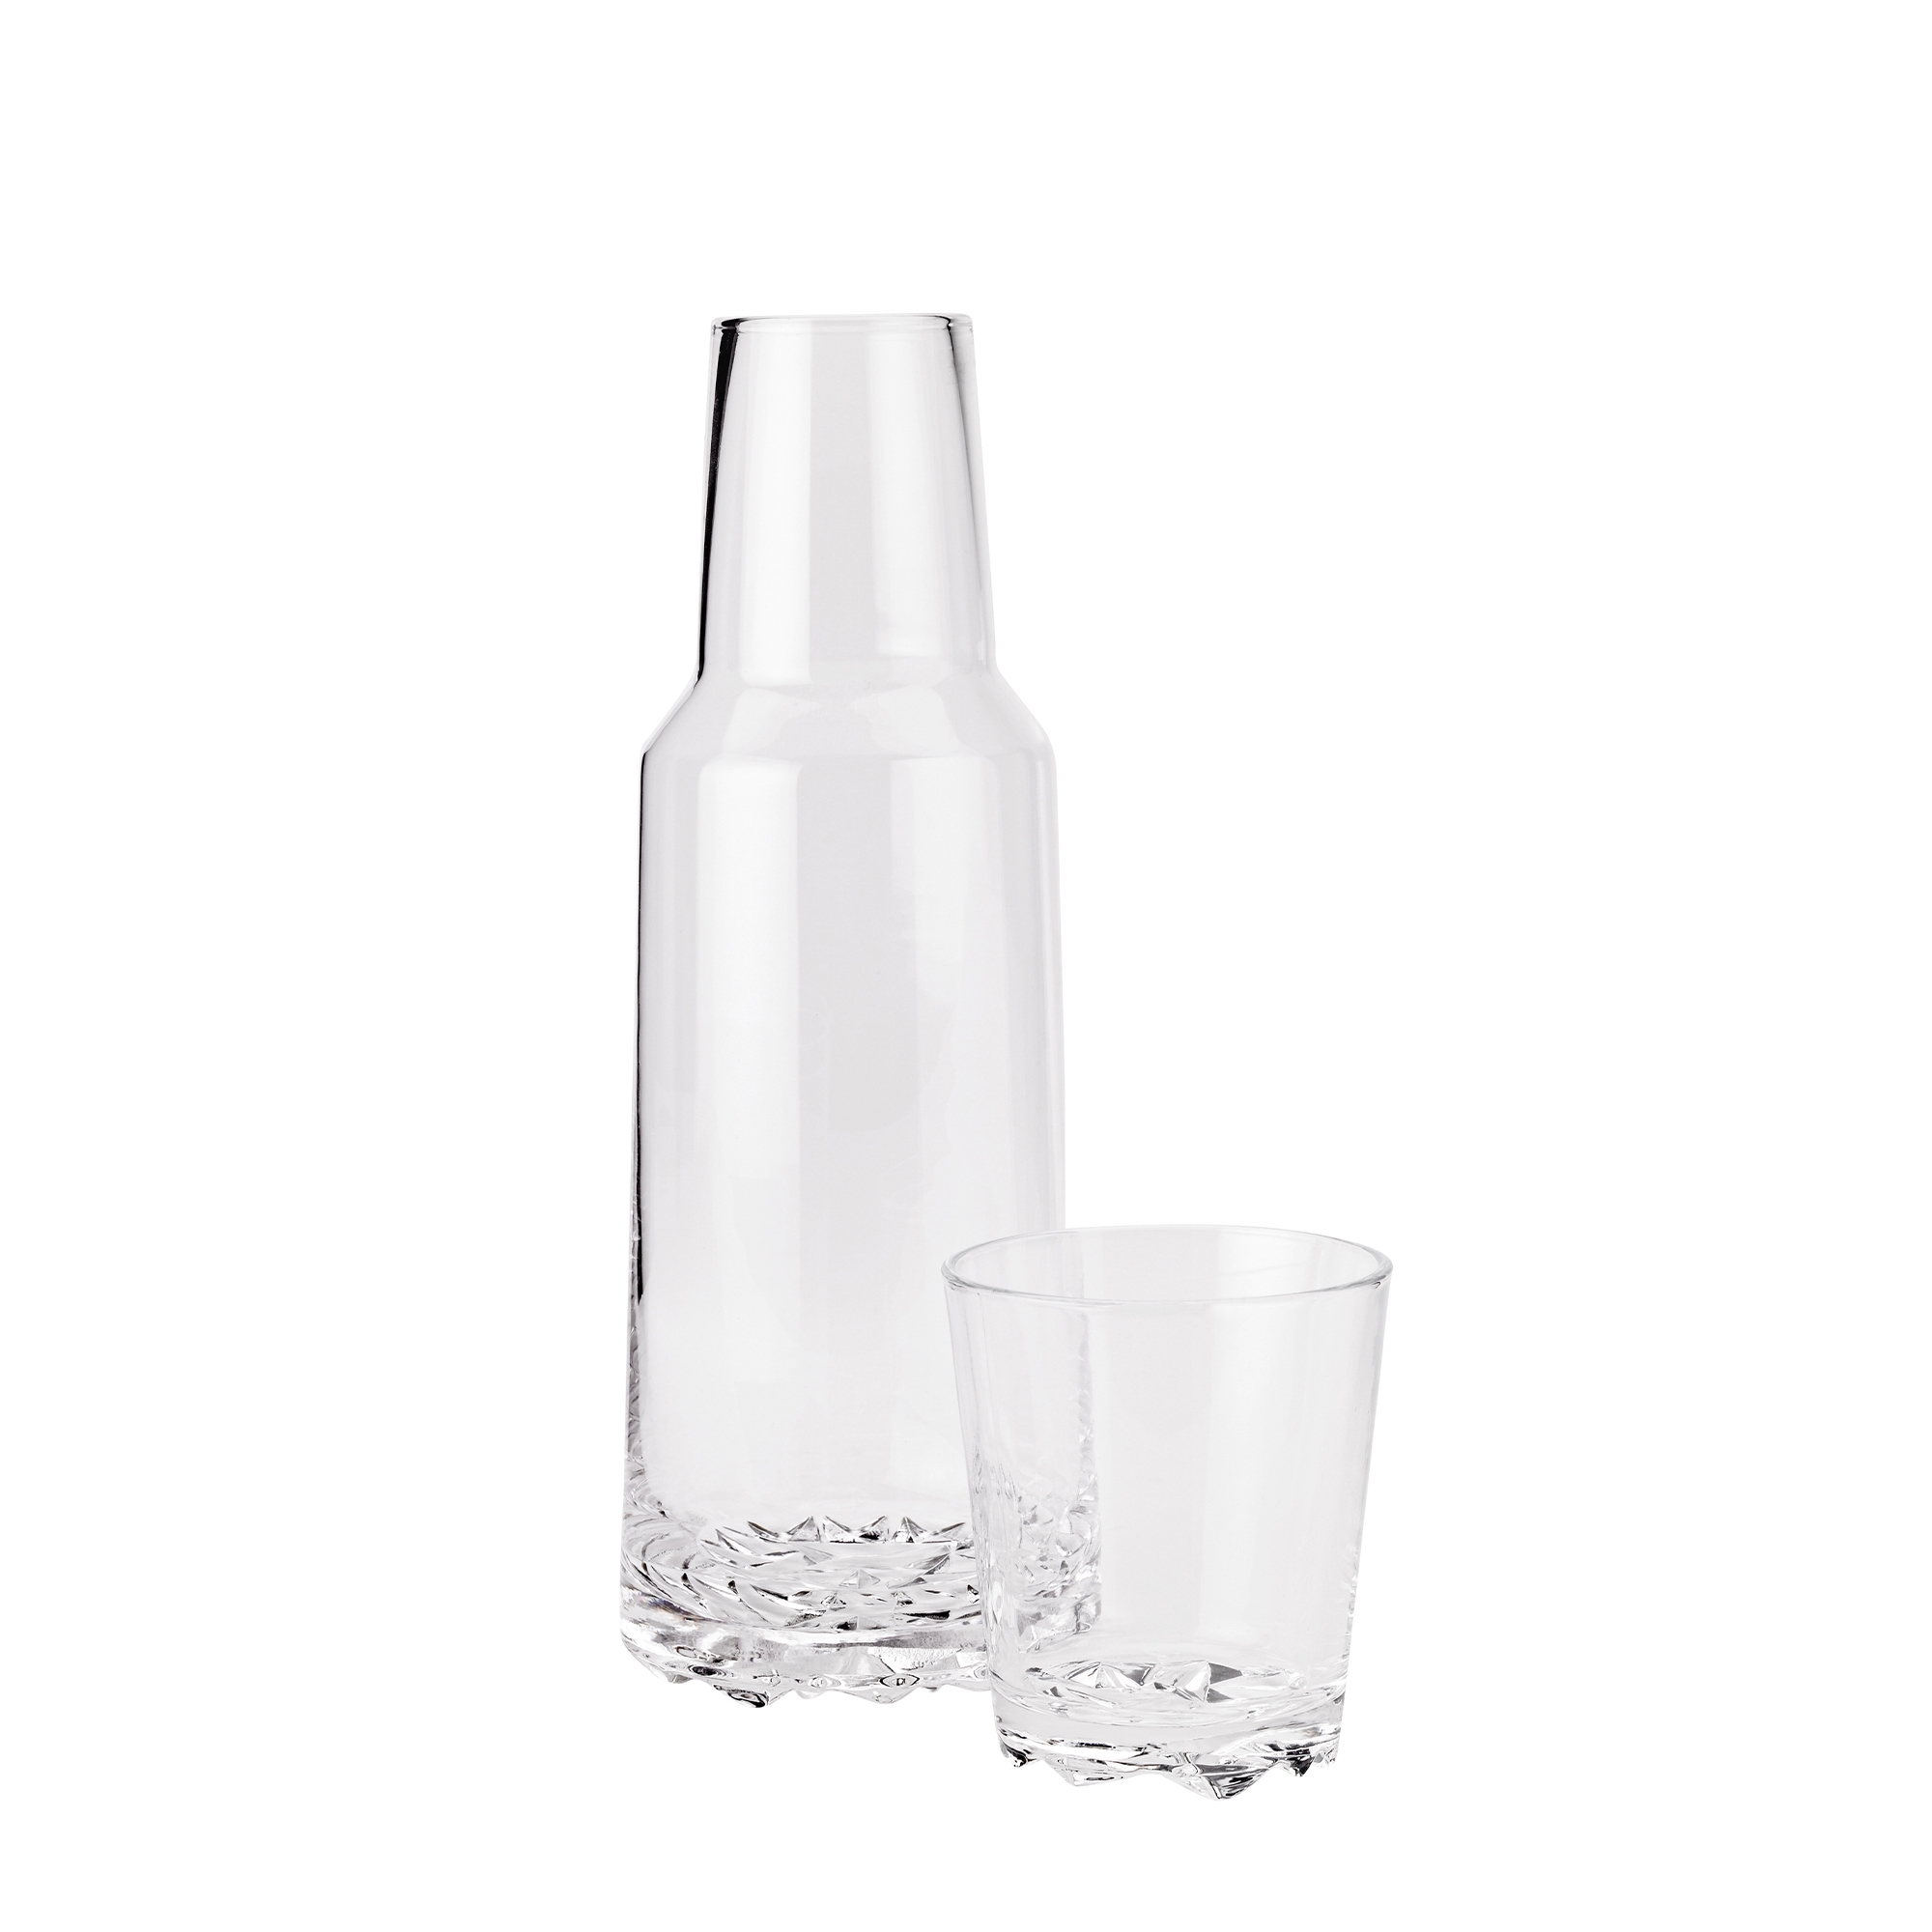 Stelton - GLACIER drinking glass 0.25l and carafe